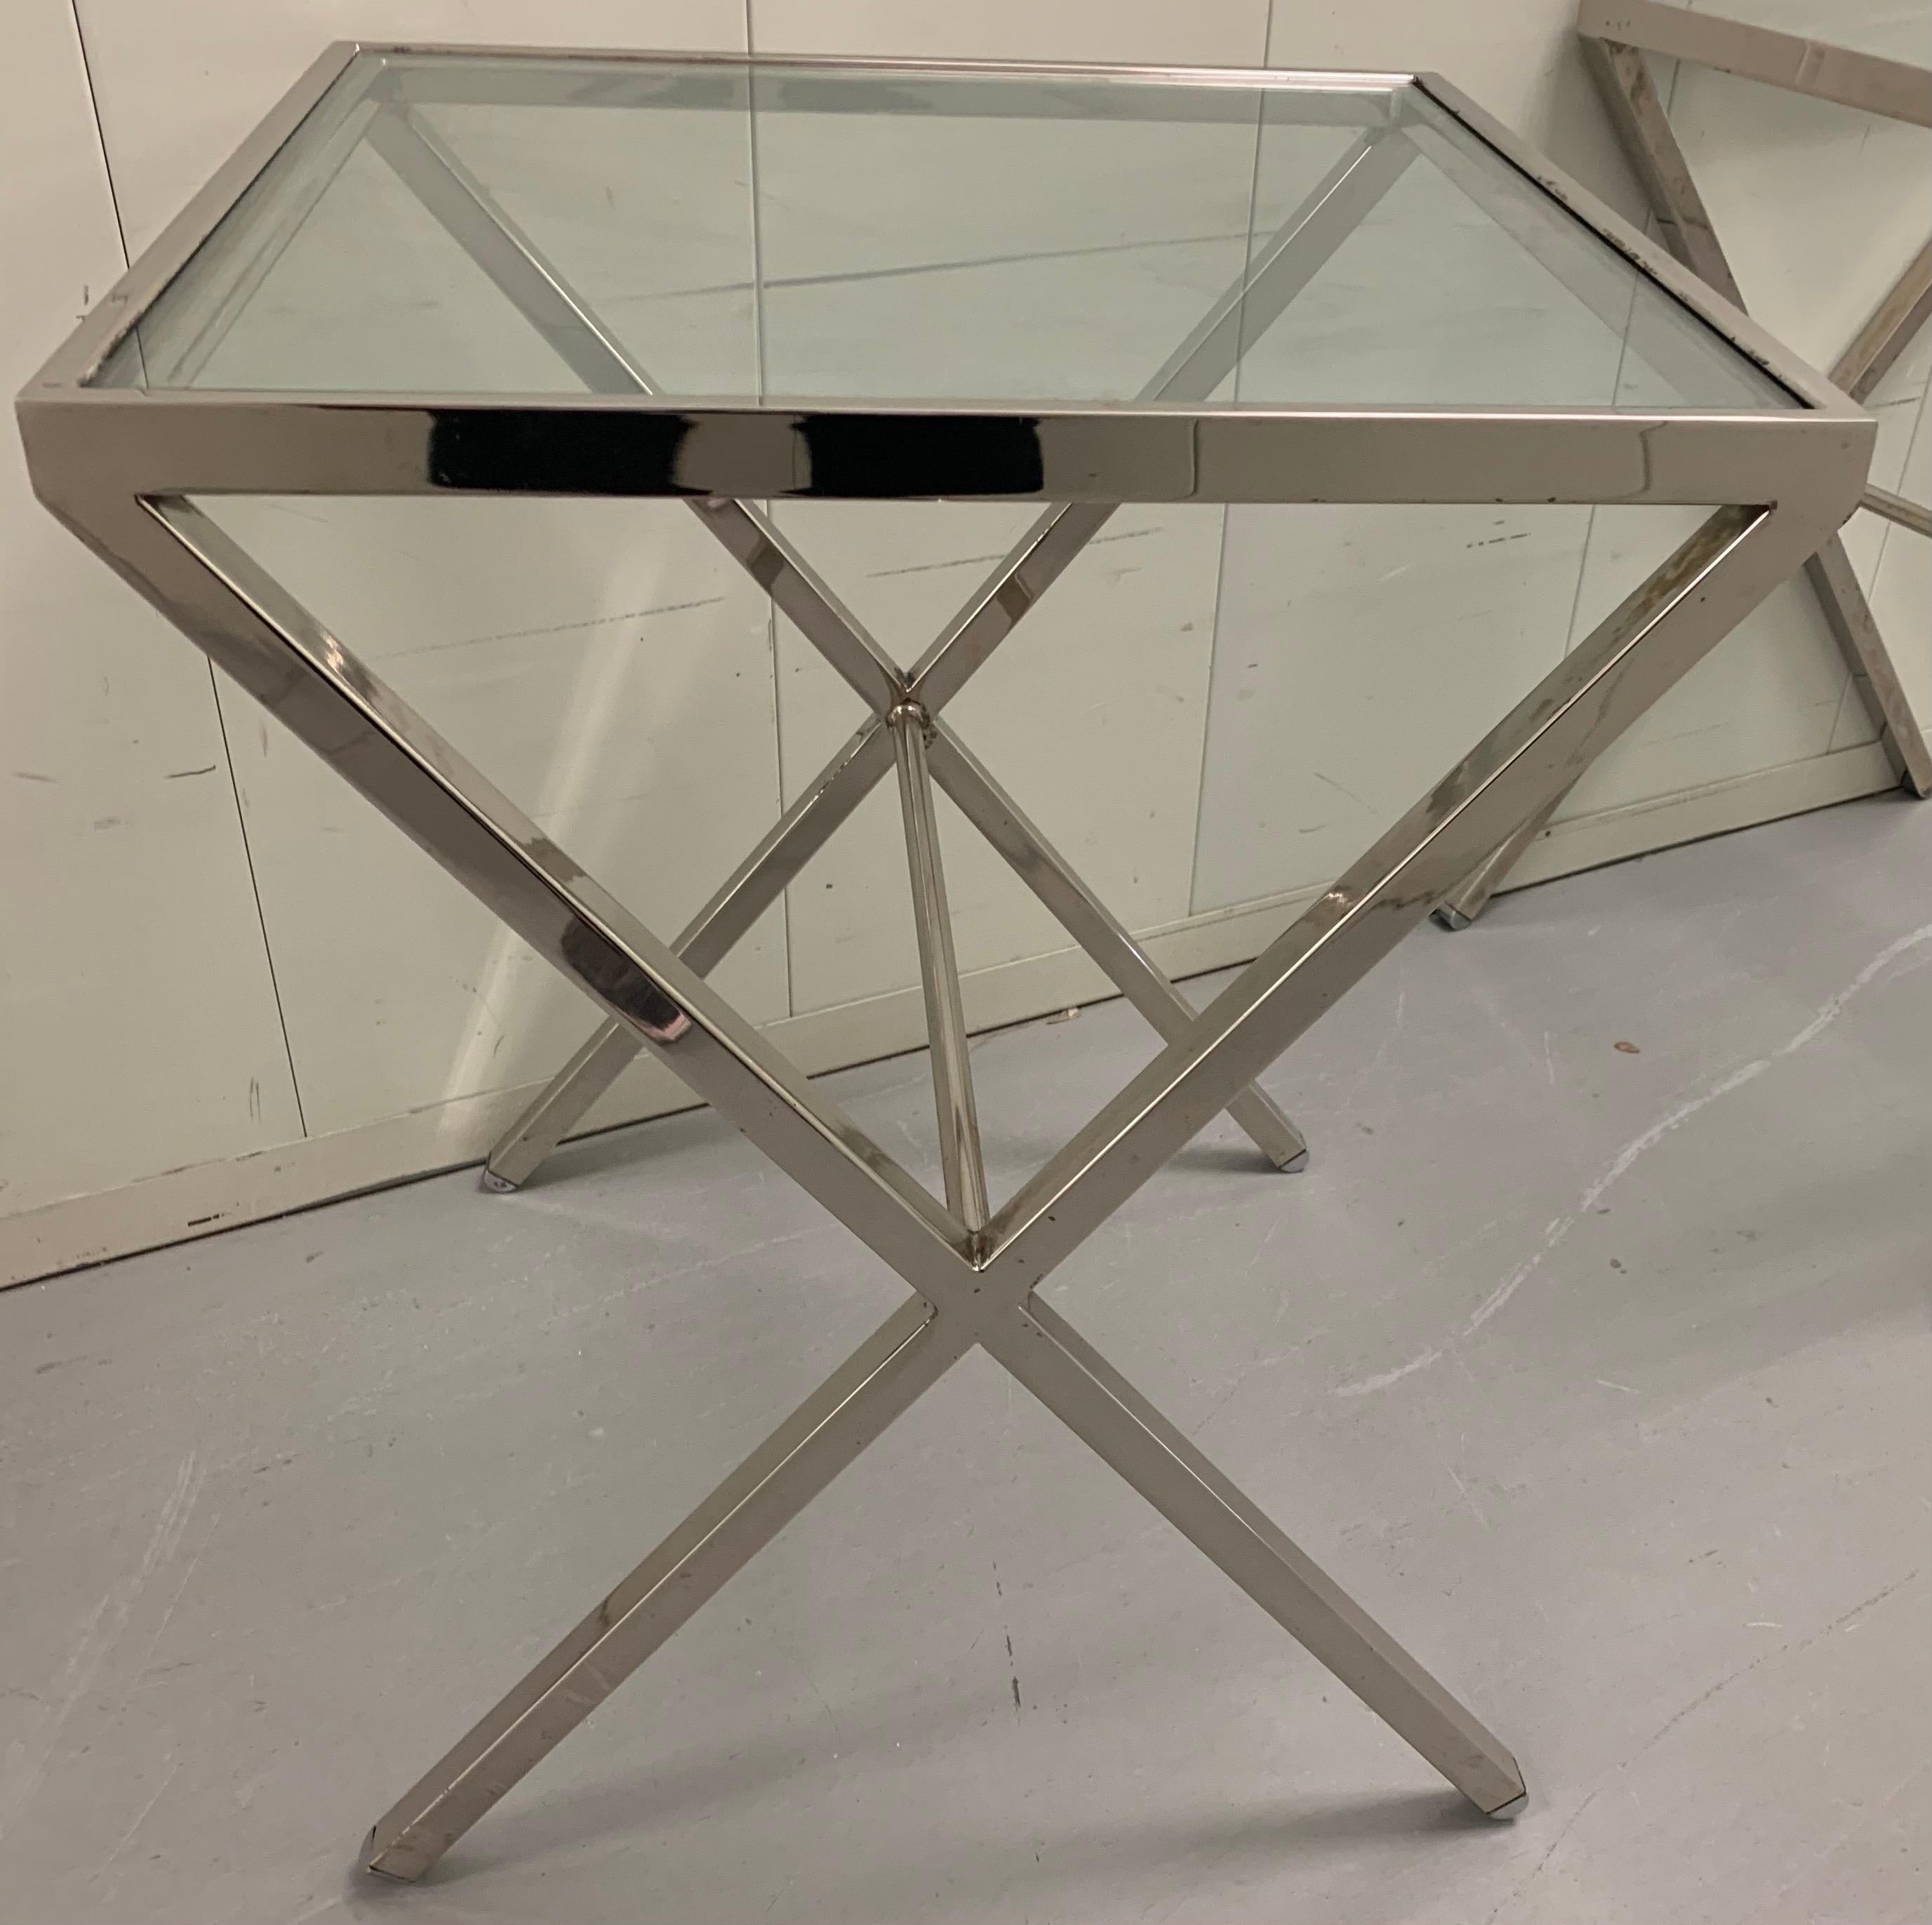 Pair of polished steel X- frame side tables. Tables are newly polished to a high shine. As found tinted grey glass tops with minimal overall wear. No makers mark or signature.